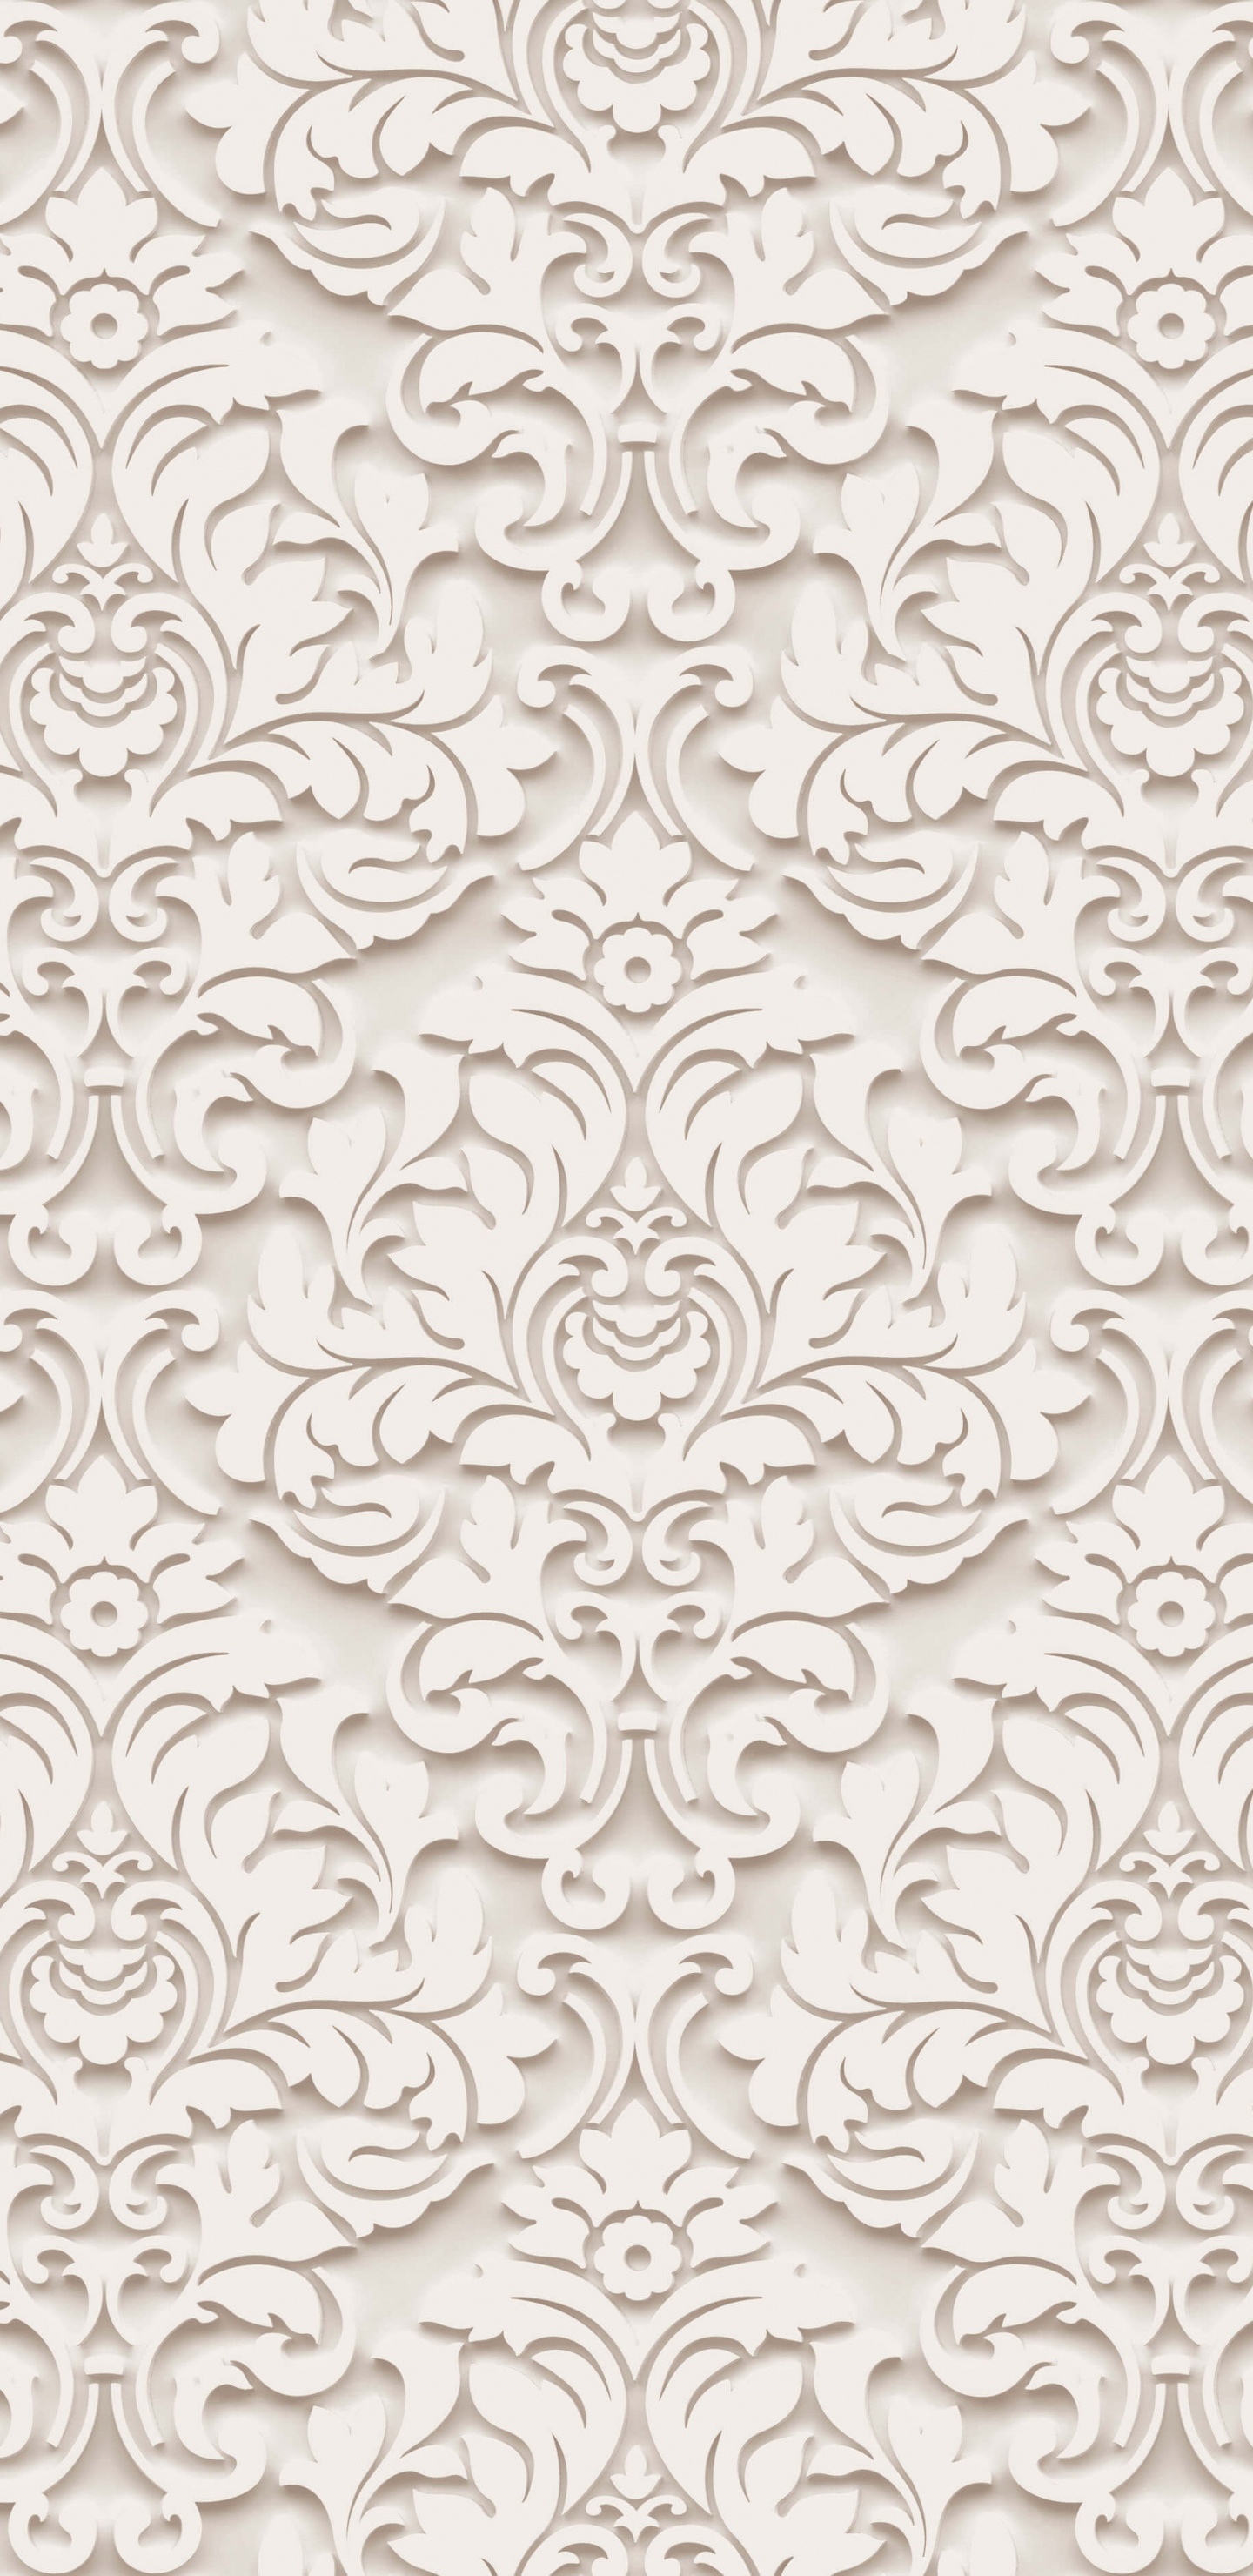 White and Black Floral Textile. Wallpaper in 1440x2960 Resolution